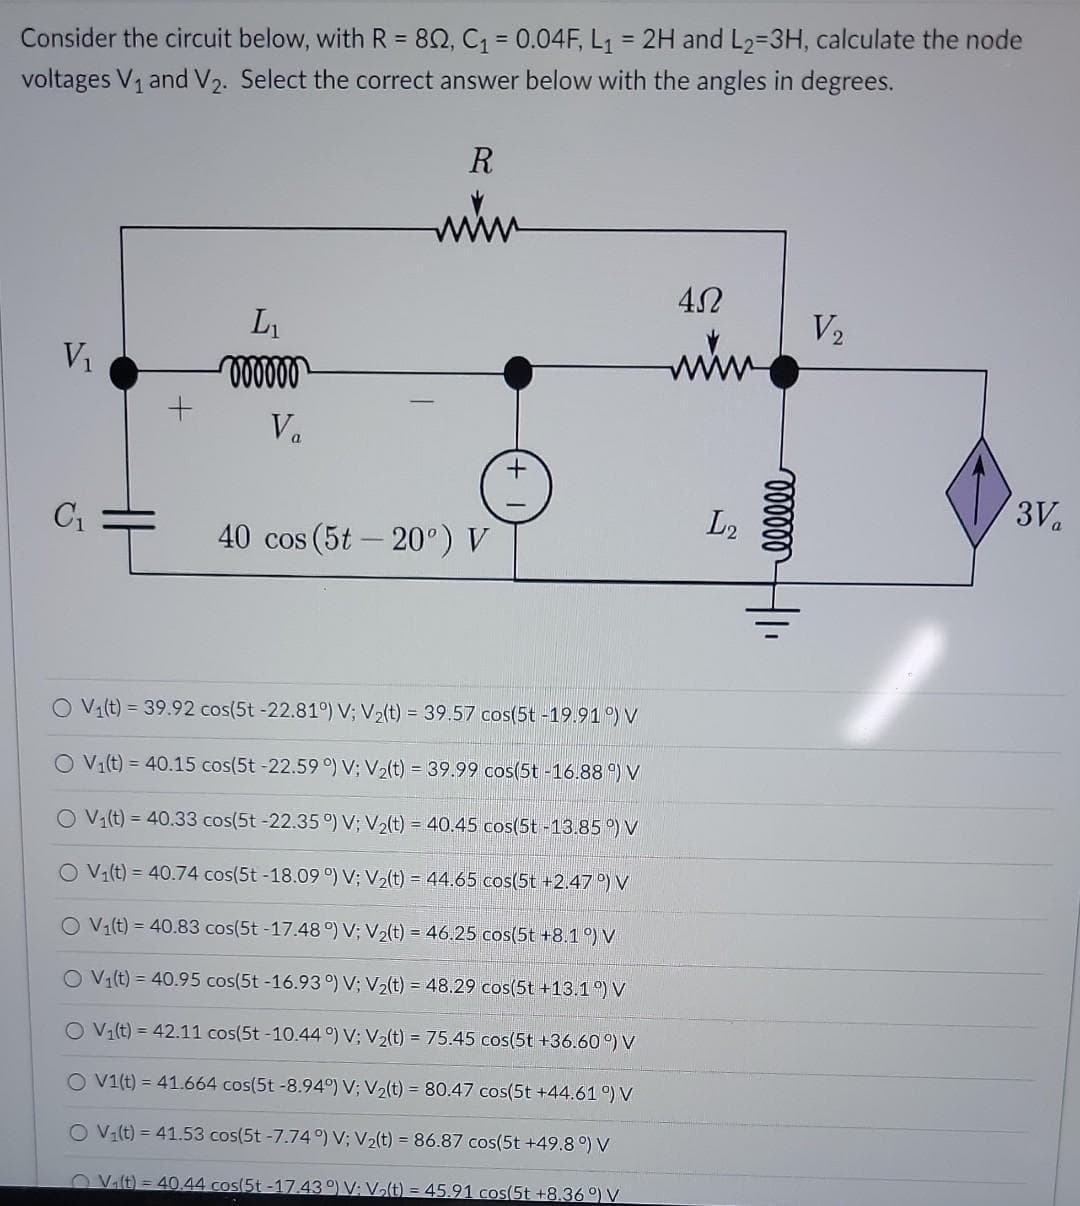 Consider the circuit below, with R = 802, C₁ = 0.04F, L₁= 2H and L₂=3H, calculate the node
voltages V₁ and V₂. Select the correct answer below with the angles in degrees.
V₁
C₁
+
L₁
oooooo
Va
R
www
40 cos (5t -20°) V
O V₁(t) = 39.92 cos(5t -22.81°) V; V₂(t) = 39.57 cos(5t-19.91°) V
O V₁(t) = 40.15 cos(5t -22.59°) V; V₂(t) = 39.99 cos(5t -16.88°) V
O V₁(t) = 40.33 cos(5t-22.35 °) V; V₂(t) = 40.45 cos(5t-13.85°) V
O V₁(t) = 40.74 cos(5t -18.09 °) V; V₂(t) = 44.65 cos(5t +2.47°) V
O V₁(t) = 40.83 cos(5t-17.48 °) V; V₂(t) = 46.25 cos(5t +8.1 °) V
O V₁(t) = 40.95 cos(5t -16.93°) V; V₂(t) = 48.29 cos(5t +13.1 °) V
O V₁(t) = 42.11 cos(5t-10.44°) V; V₂(t) = 75.45 cos(5t +36.60 °) V
O V1(t) = 41.664 cos(5t -8.94°) V; V₂(t) = 80.47 cos(5t +44.61 °) V
O V₁(t) = 41.53 cos(5t -7.74°) V; V₂(t) = 86.87 cos(5t +49.8 °) V
V₁(t)=40.44 cos(5t-17.43°) V: V₂(t) = 45.91 cos(5t +8.36°) V
45
L2
oooooo
V₂
3V₁